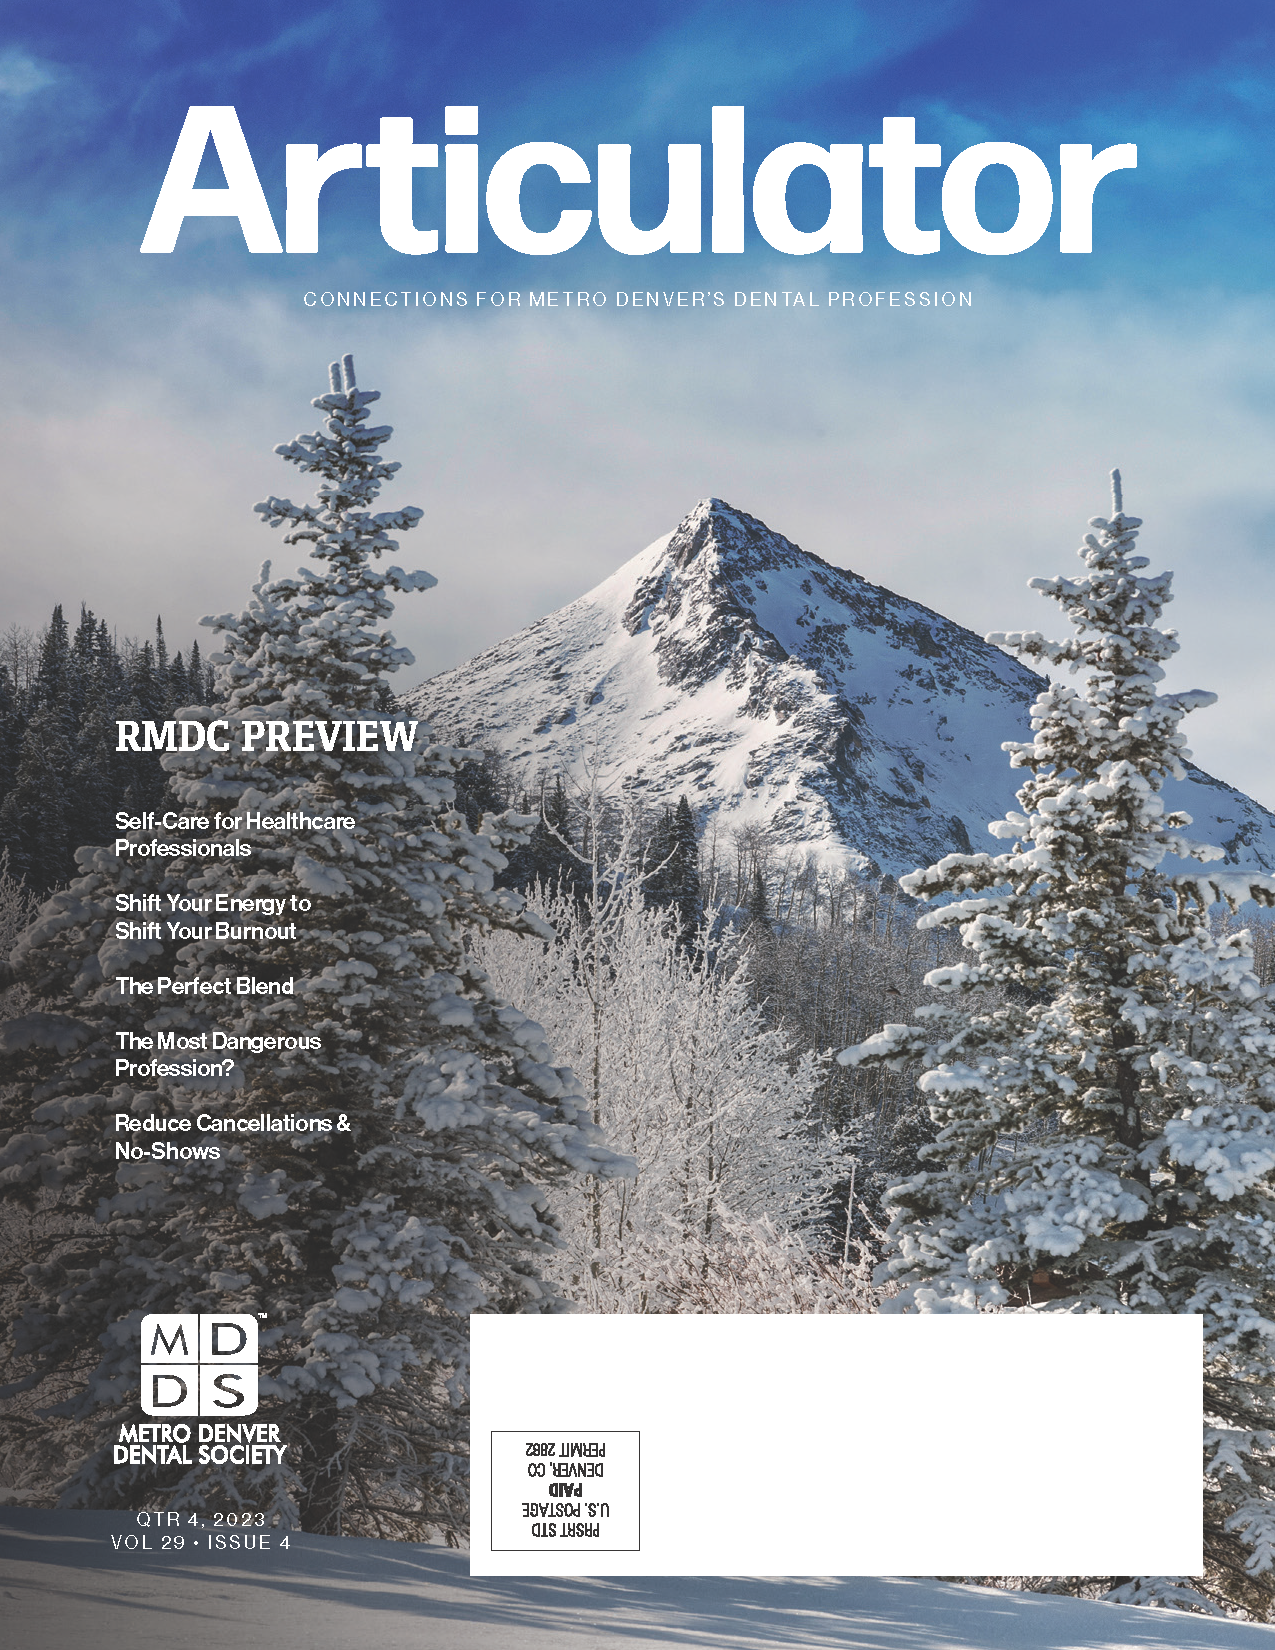 Cover of the Metro Denver Dental Society's Articulator magazine features a winter image of snow-covered mountains and pine trees.